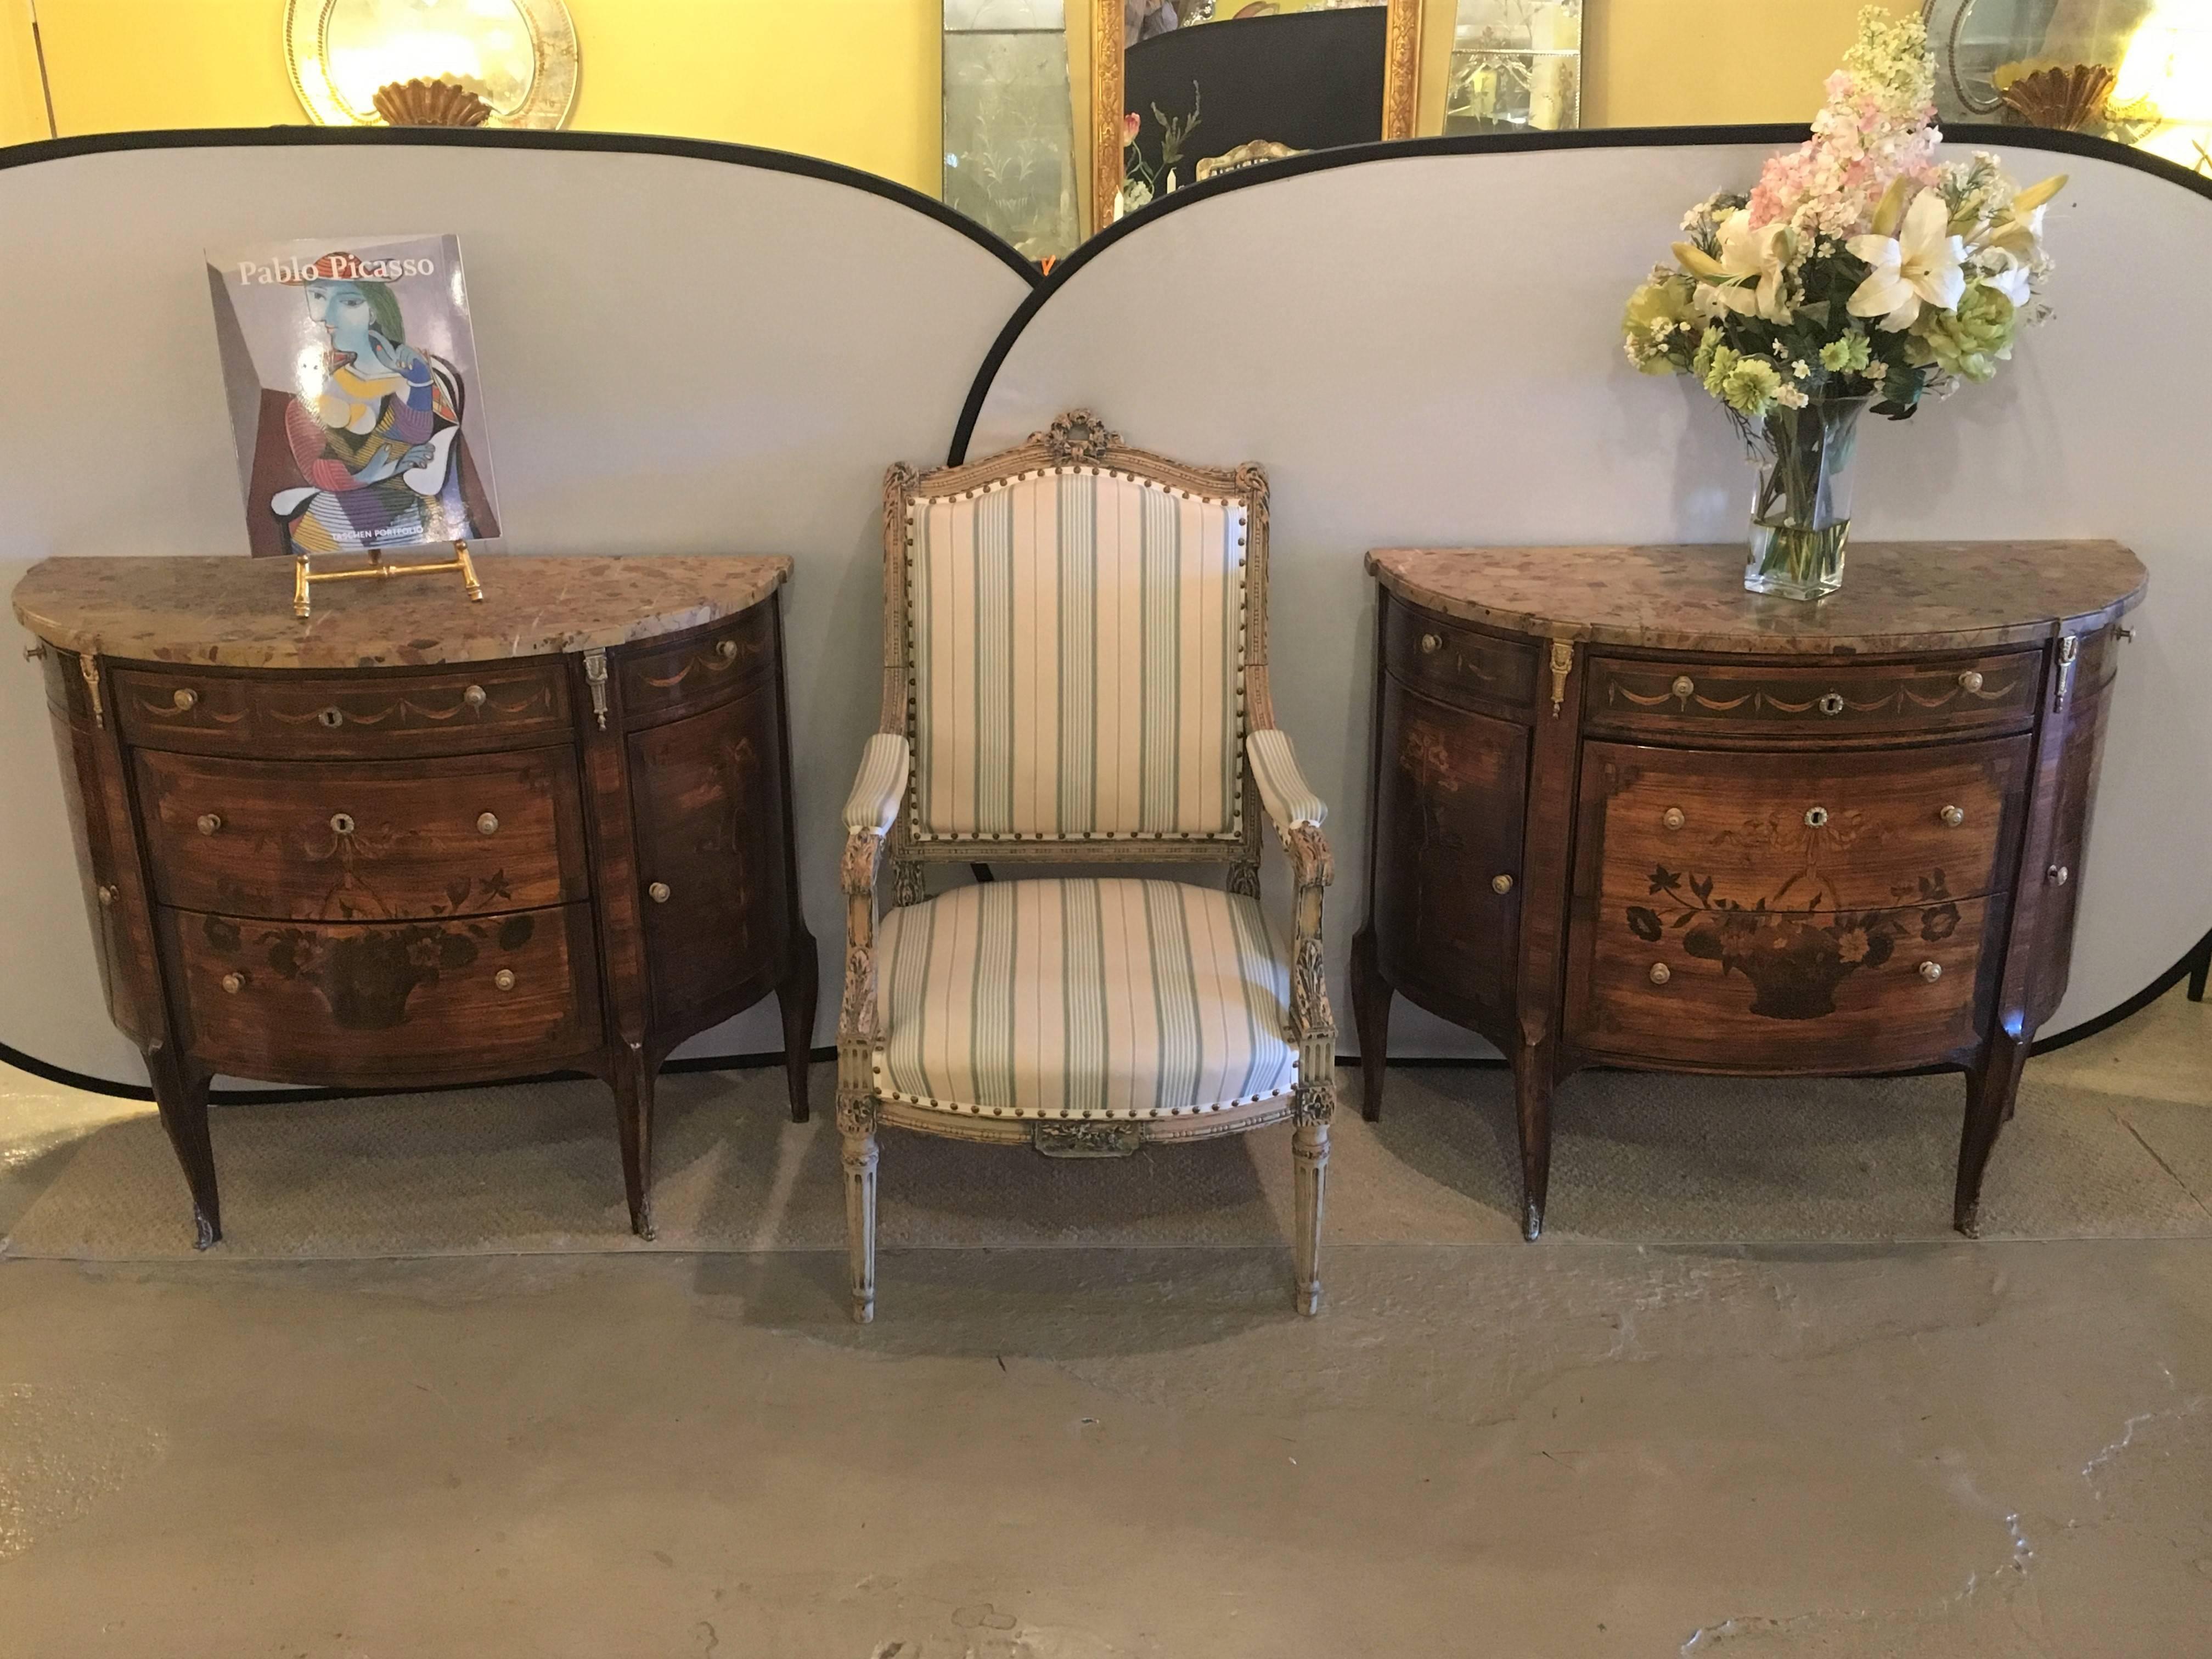 A pair of 19th century French Louis XV Style demilune commode / bedside stands. A fine pair of custom quality Louis XV style commodes. The deep demilune form having three drawers in the centre with a large basket of inlaid flowers on the larger two